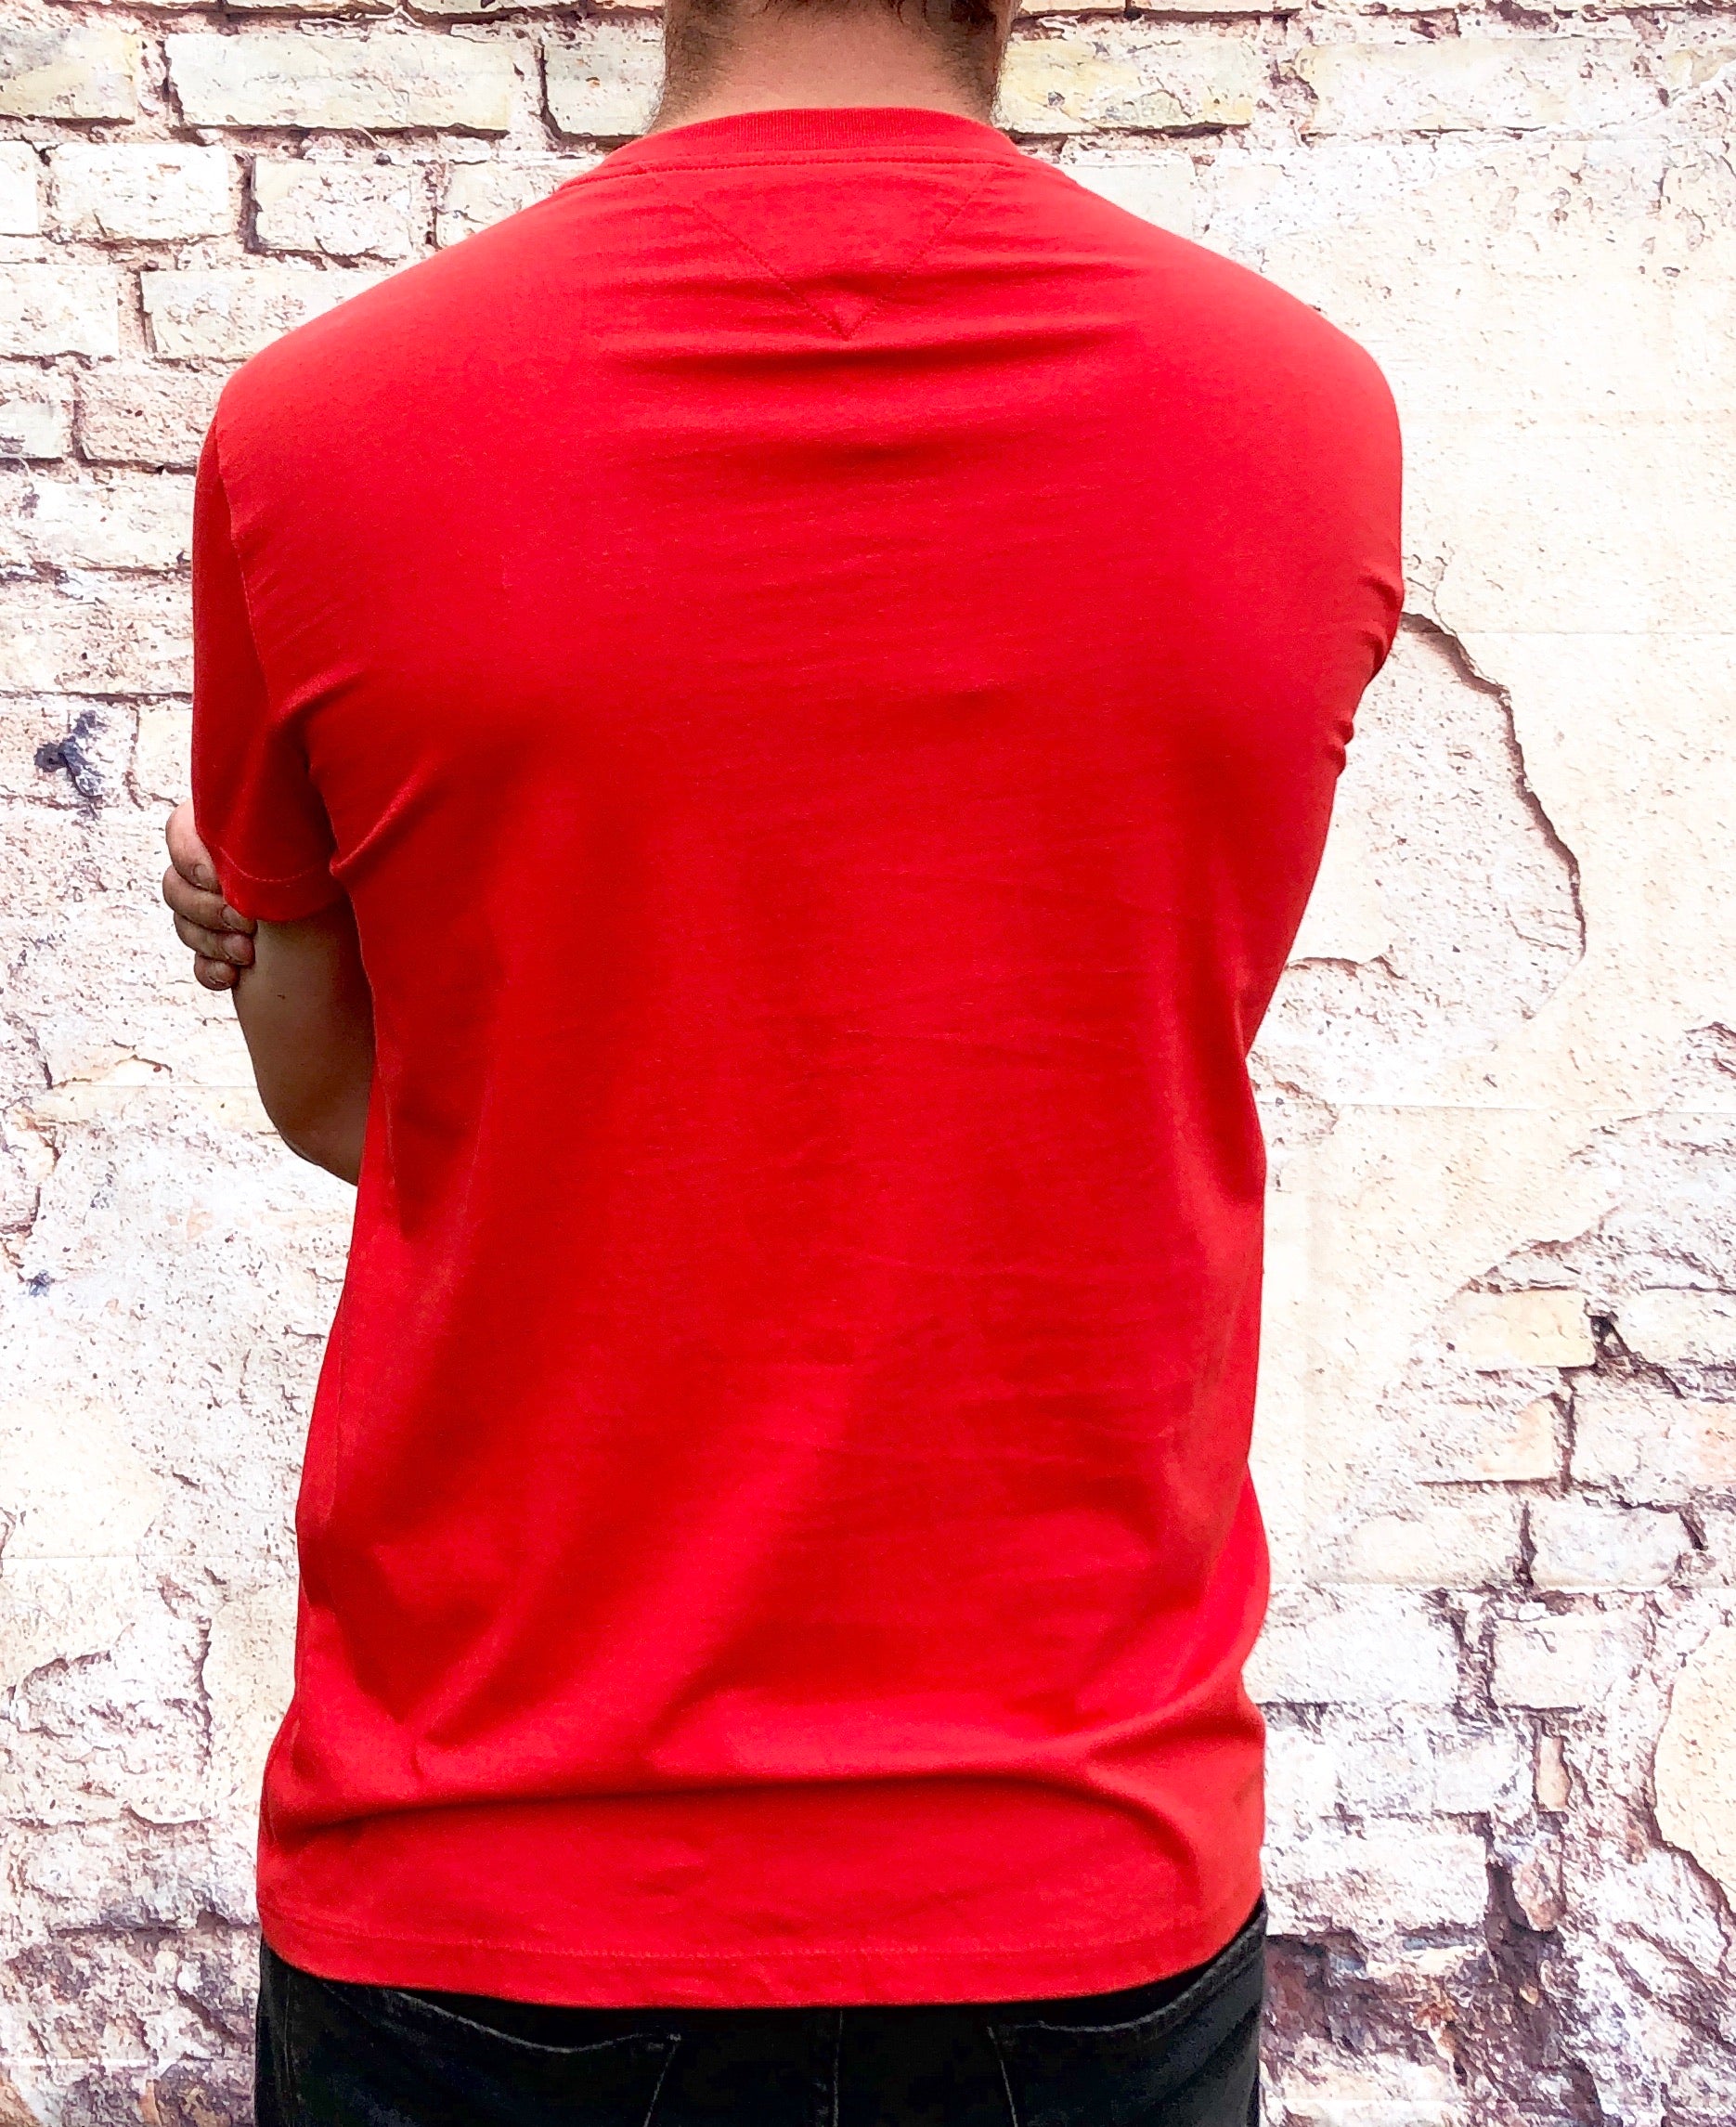 Red Jeans tshirt / tee shirt, men's branded – F